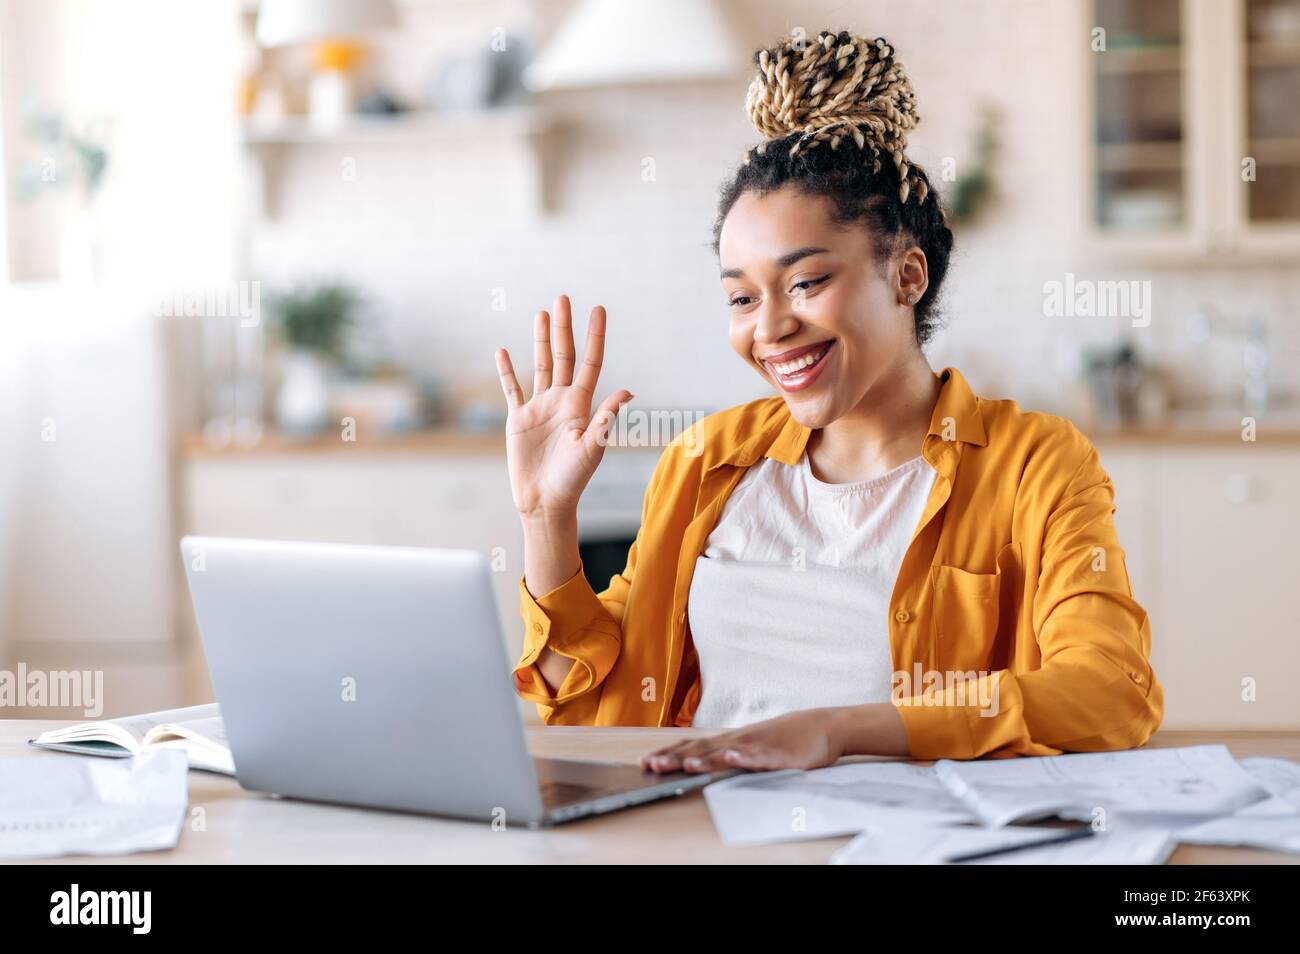 Happy successful beautiful stylish african american girl, student or freelancer, talking by video call, online meeting with colleagues or friends, greeting with hand gesture, smiling friendly Stock Photo